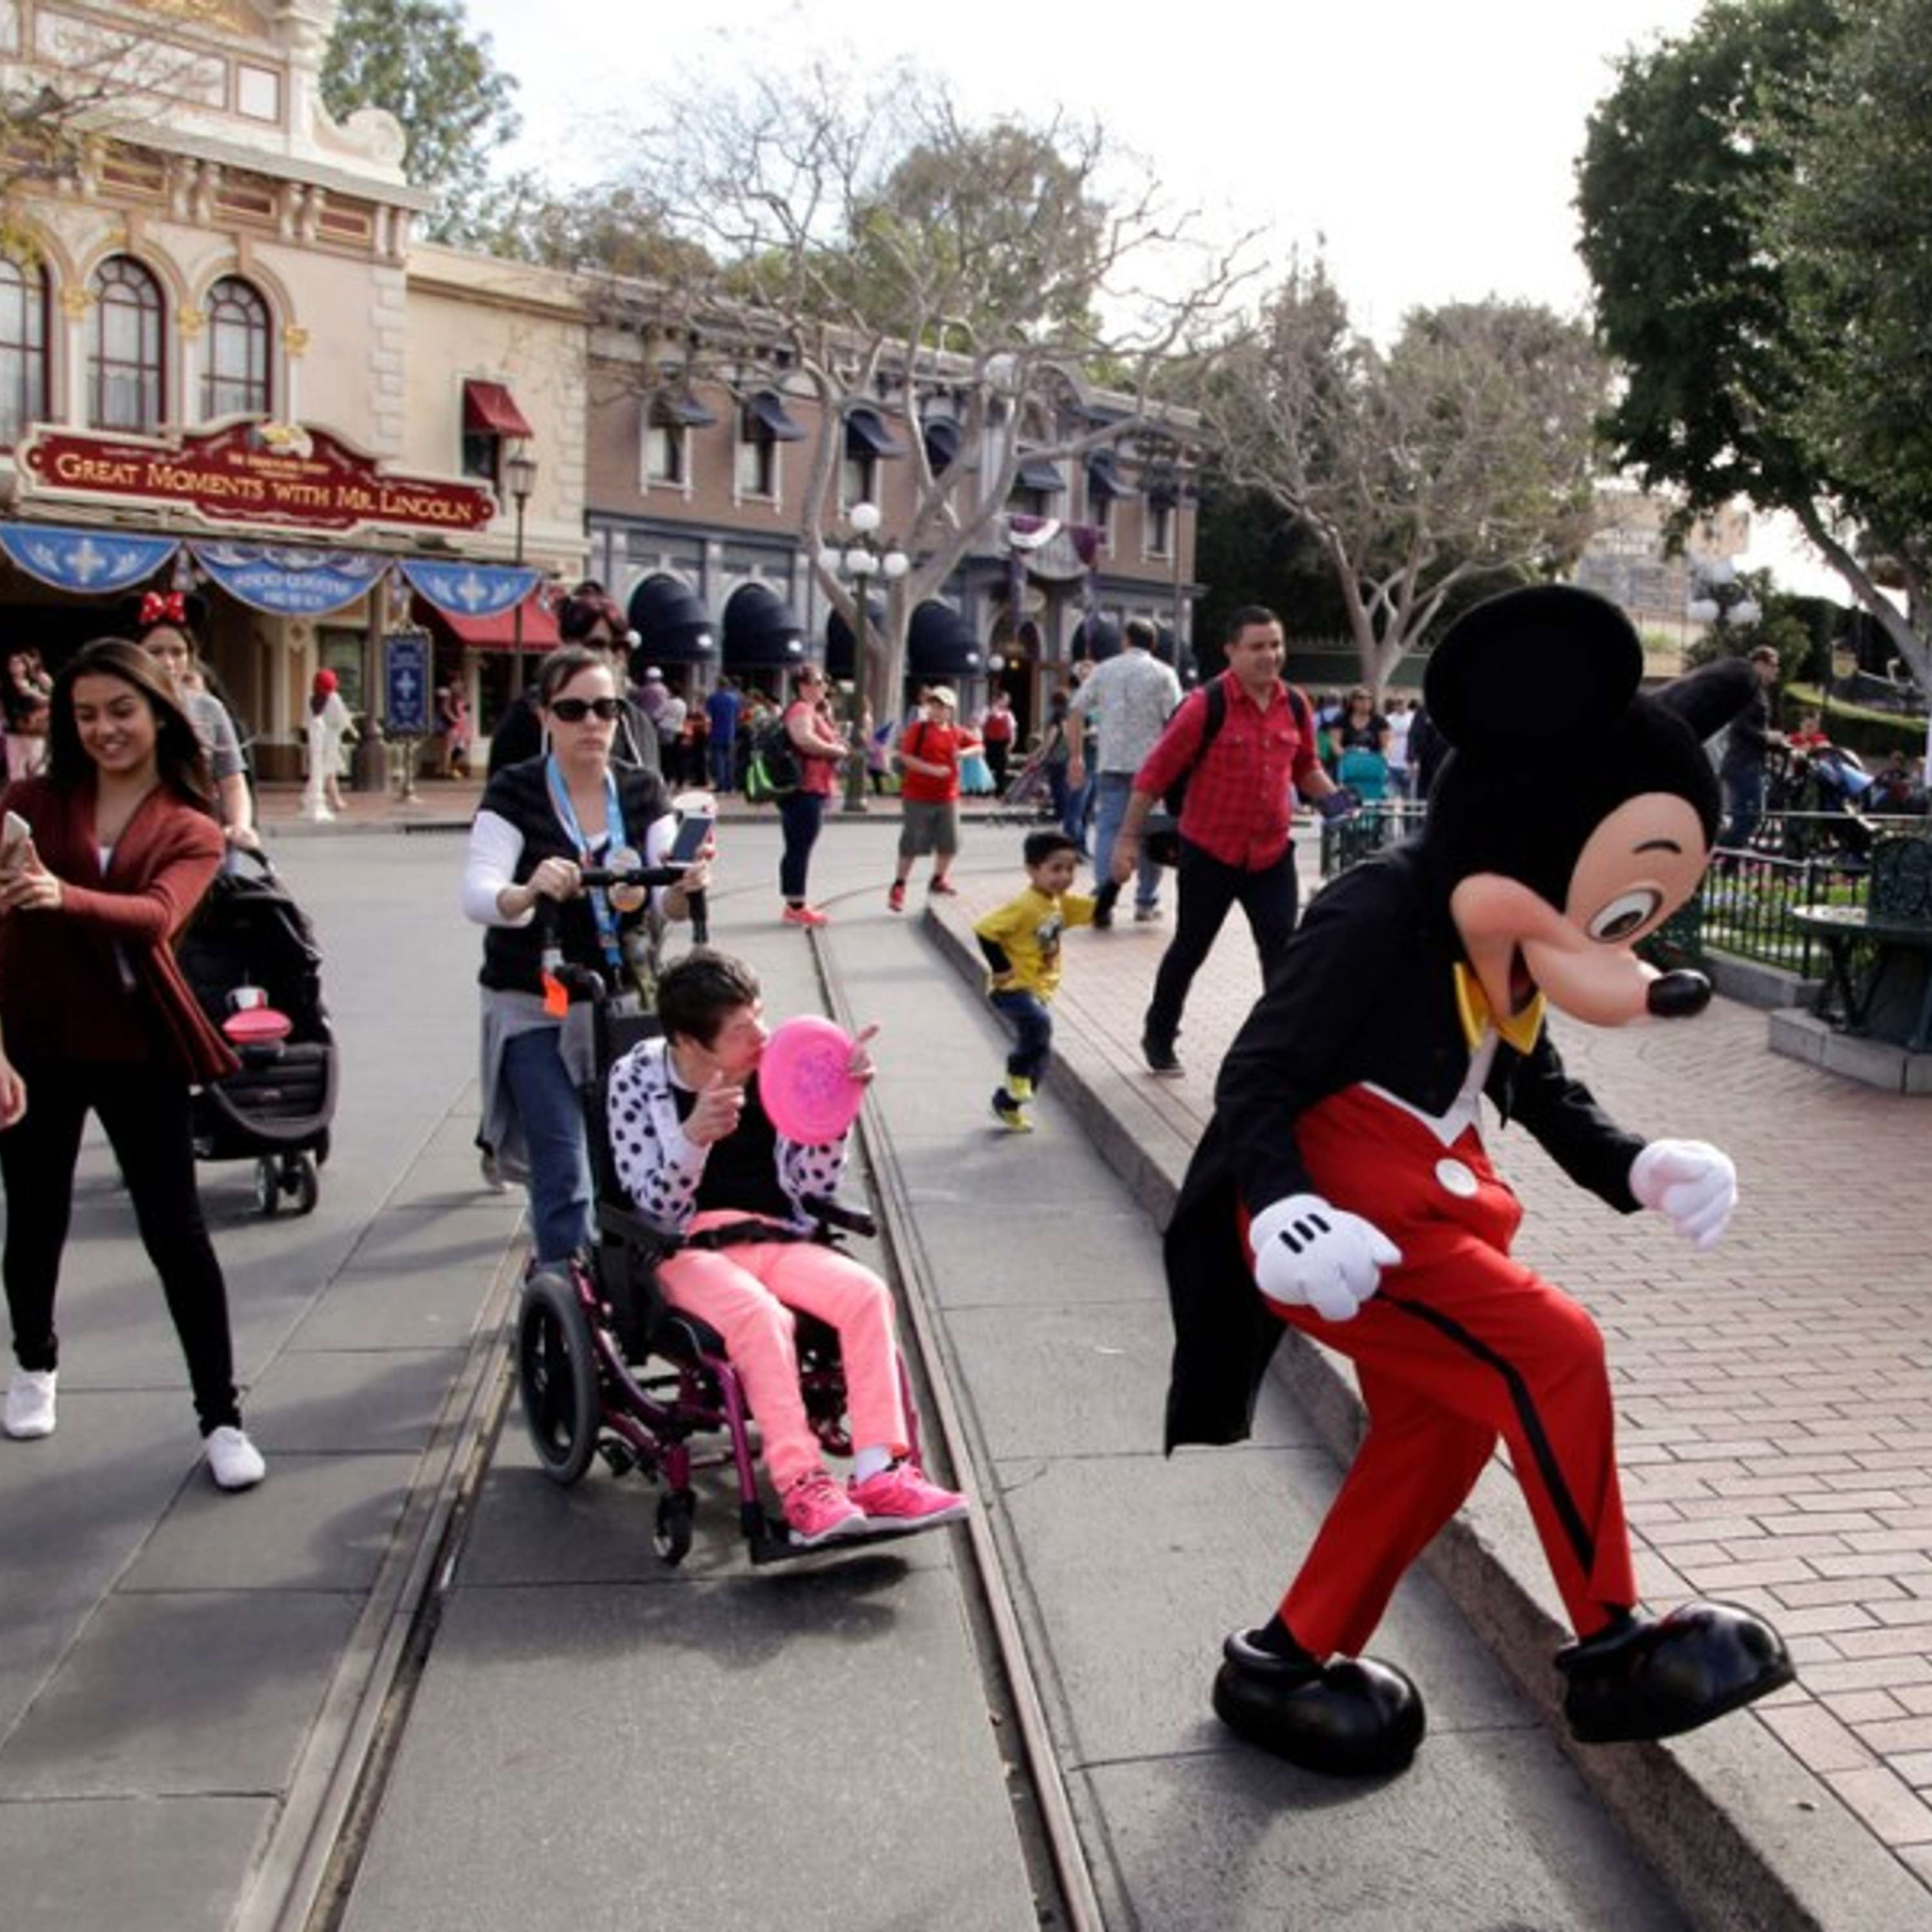 Disneyland Performers Unionize, NRA Endorses Trump, Giuliani Indicted in Election Fraud, Biden at Morehouse College, and more...